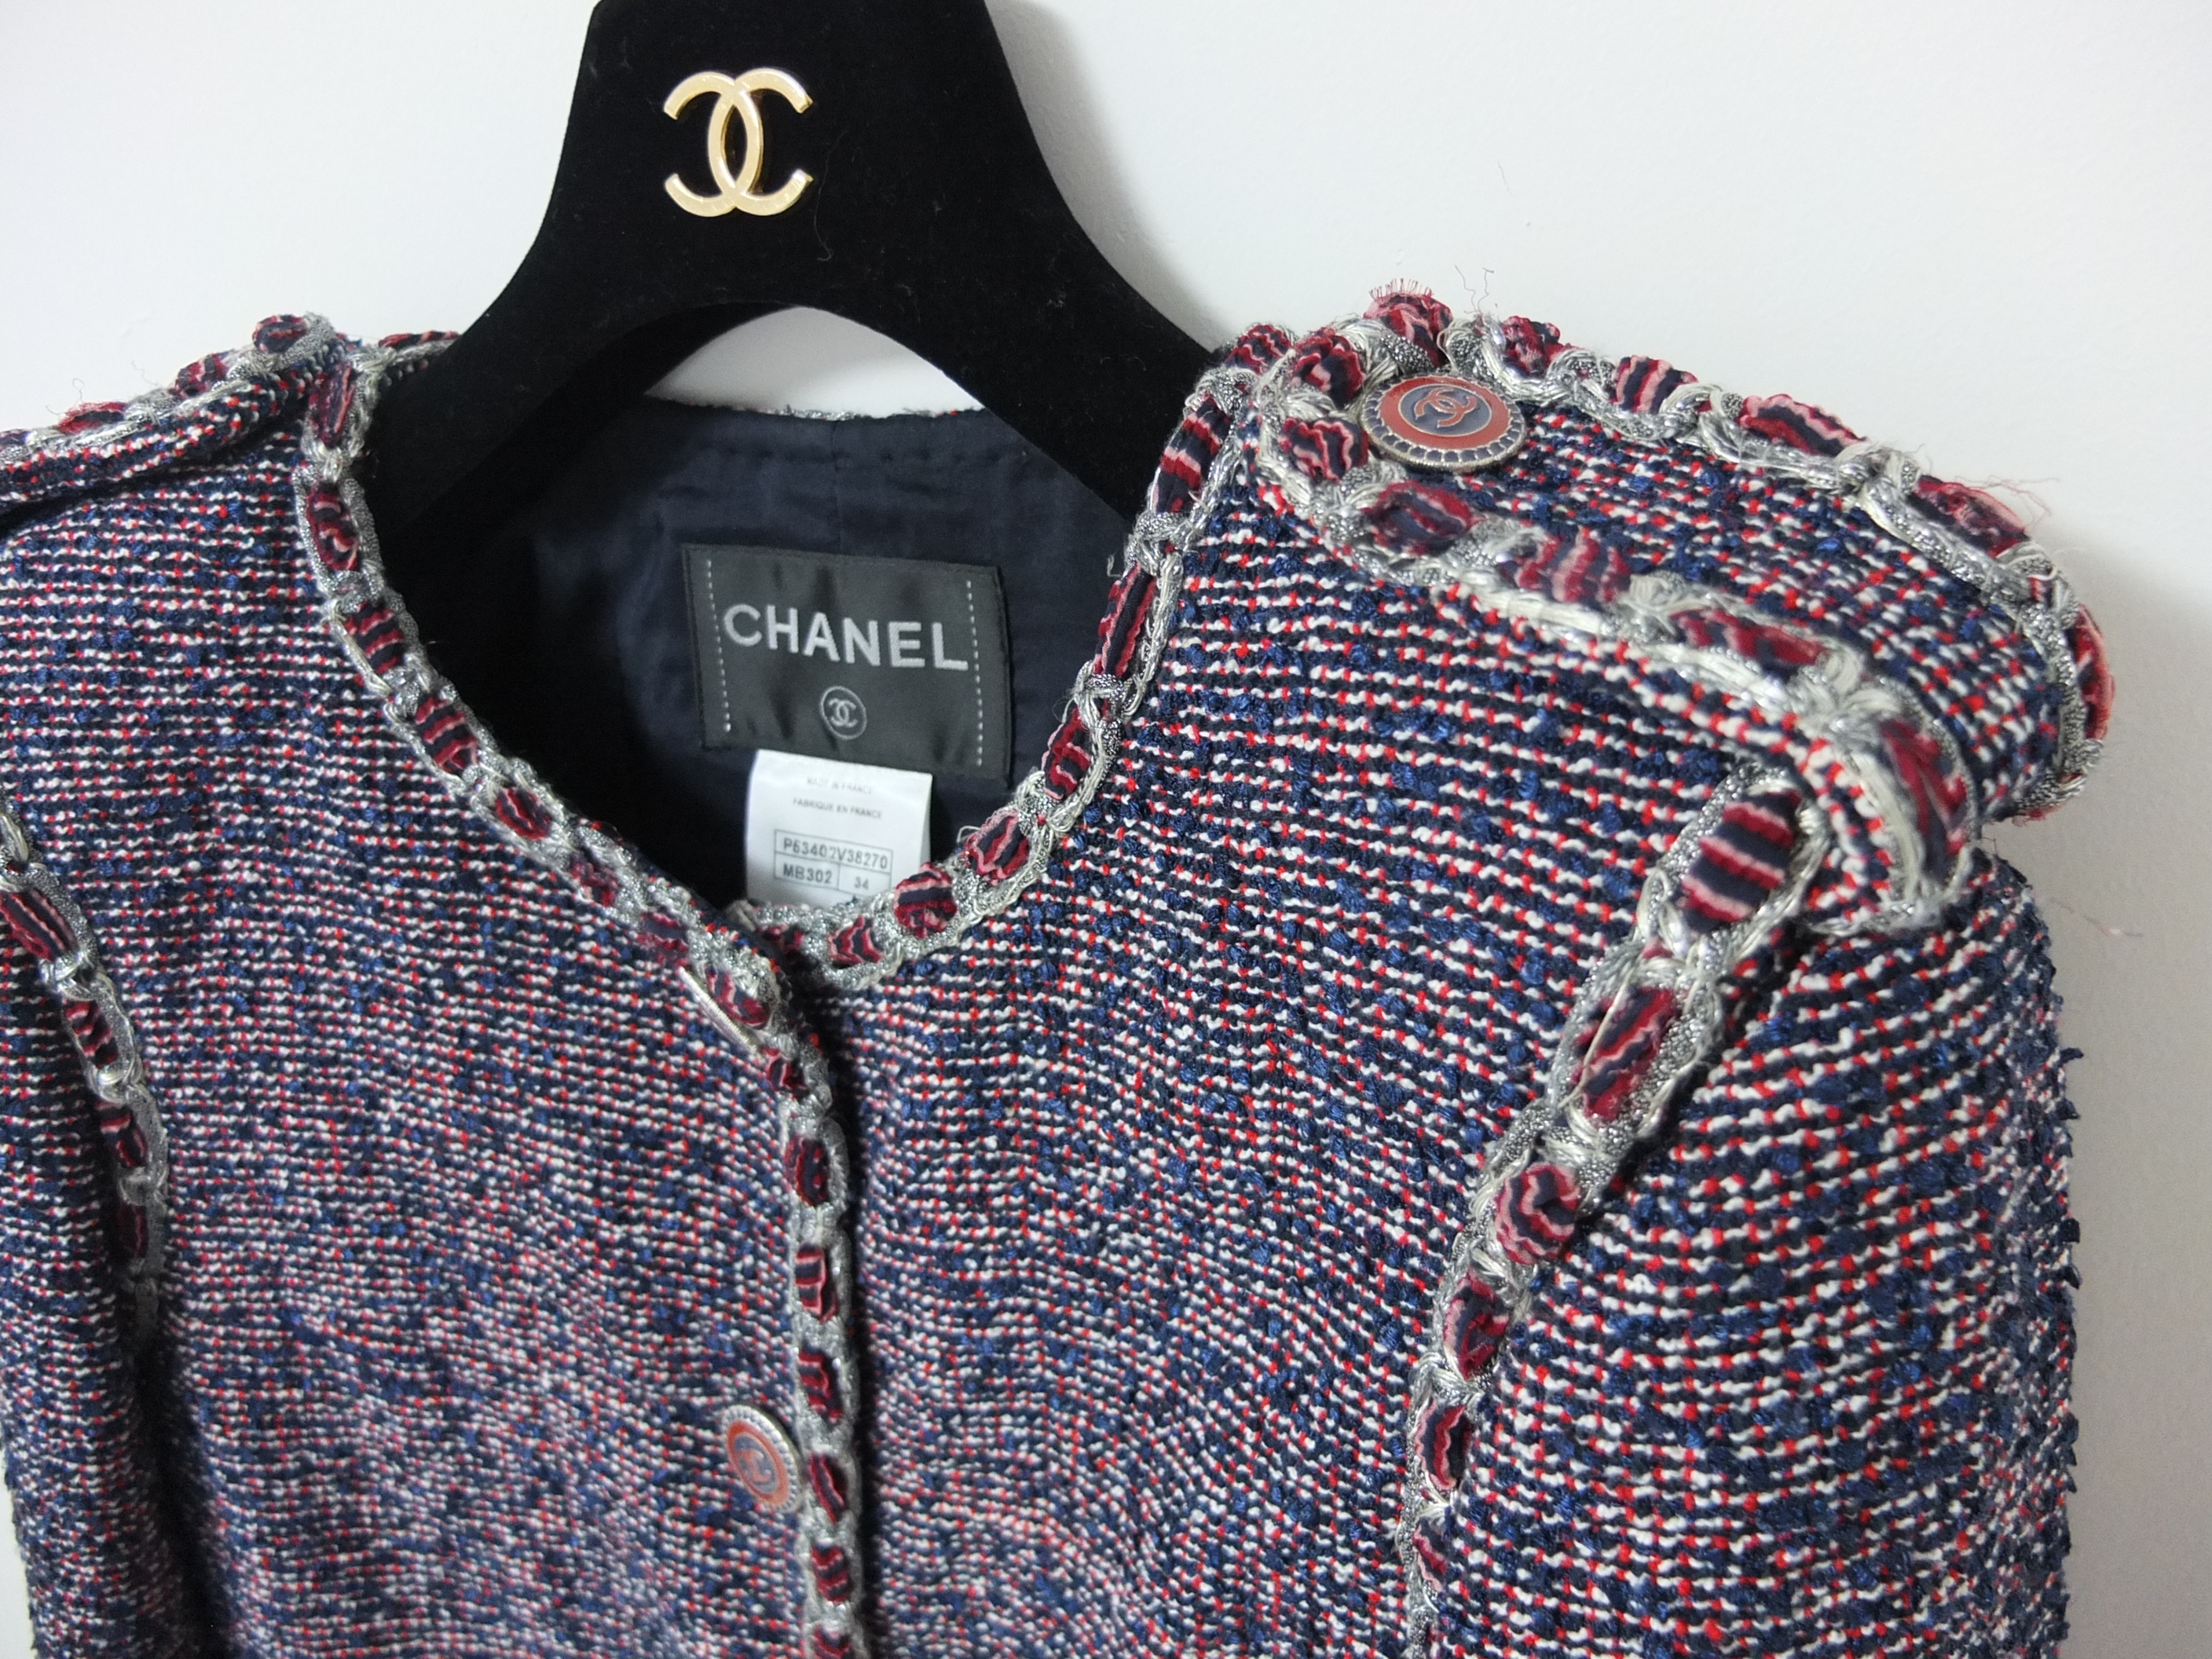 Reveals: Chanel Tweed Jacket – For Days Like These